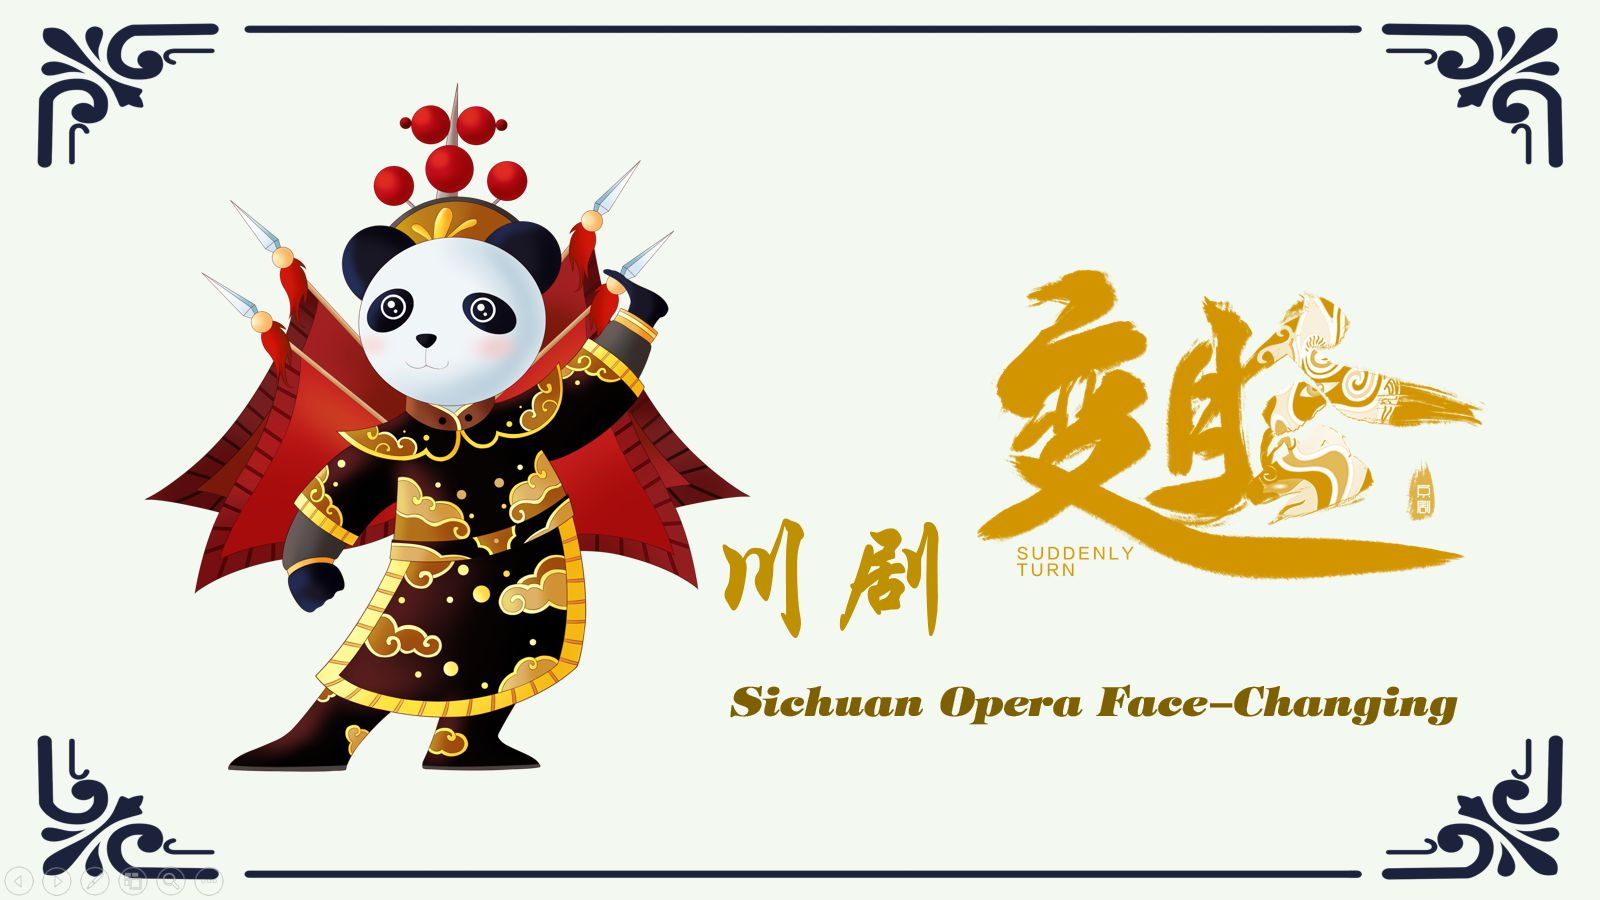 The Culture of Sichuan Opera Face-Changing